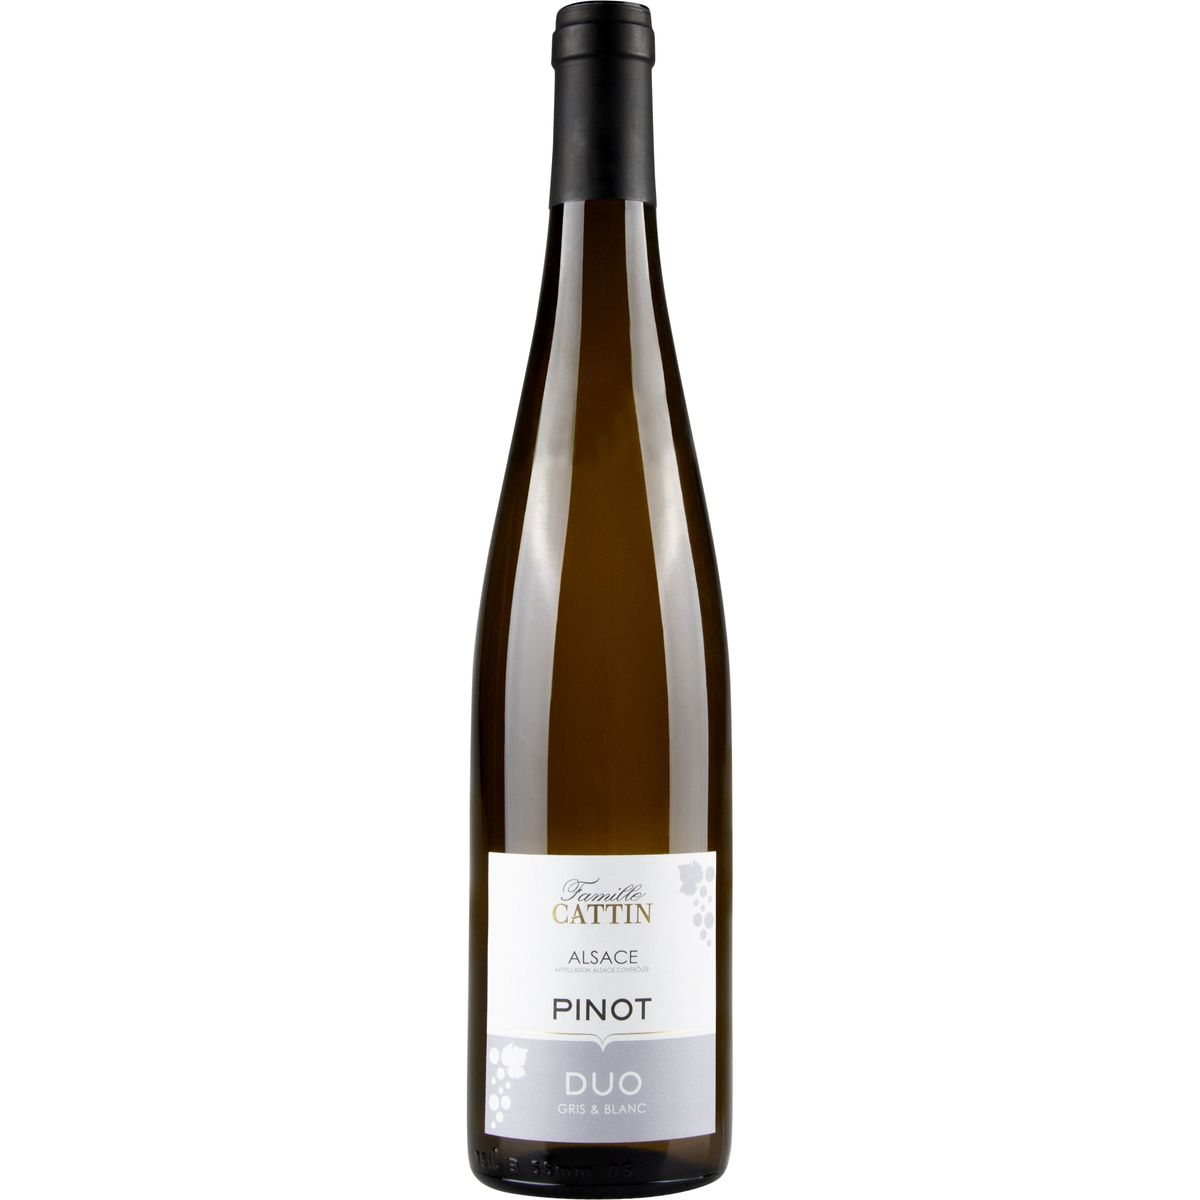 France Alsace Famille Cattin Pinot Duo Gris & Blanc